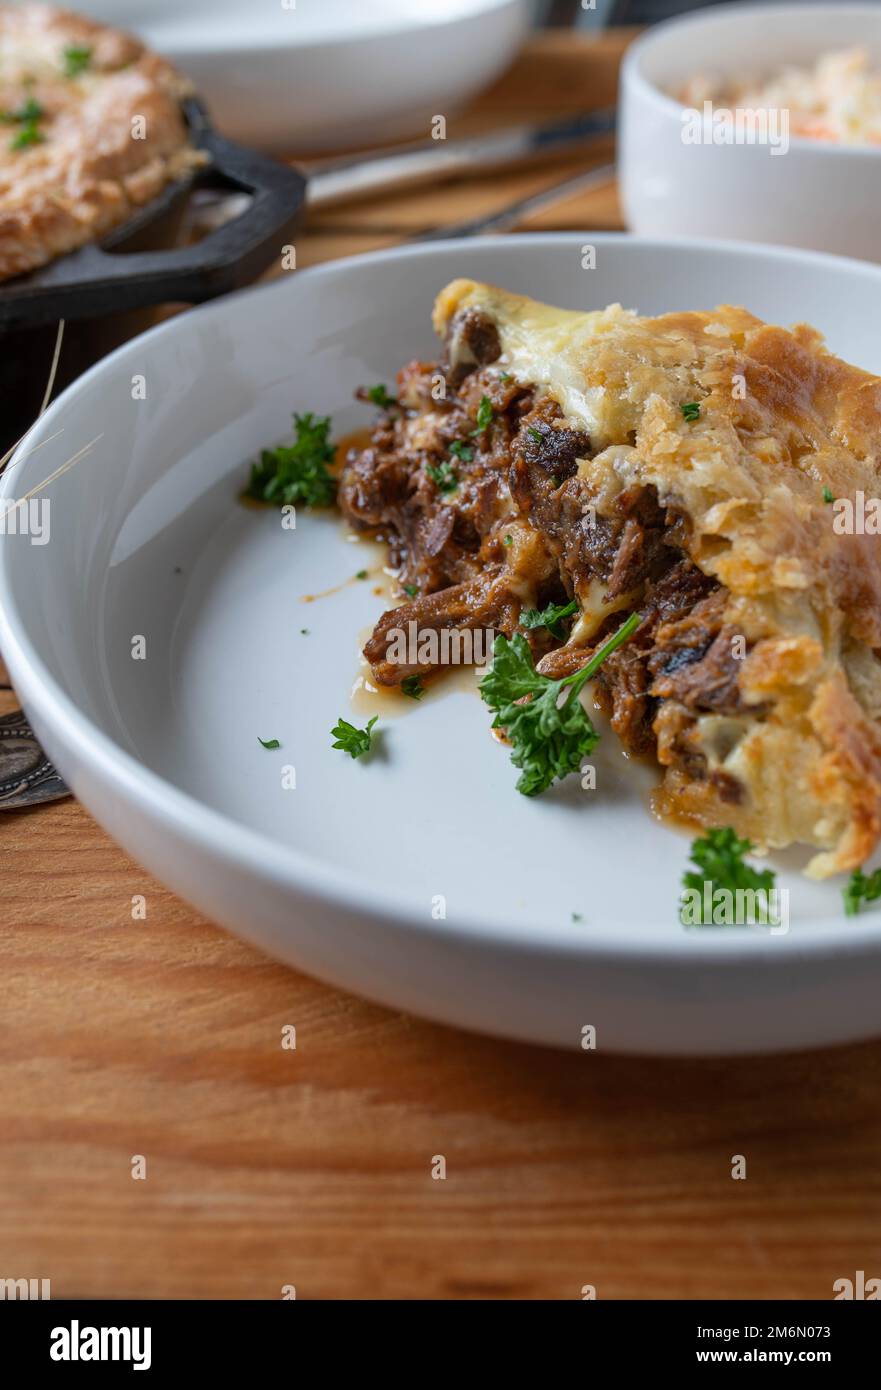 Slice of Steak and cheese pie on a plate. Cooked in a cast iron pan with beef shanks Stock Photo